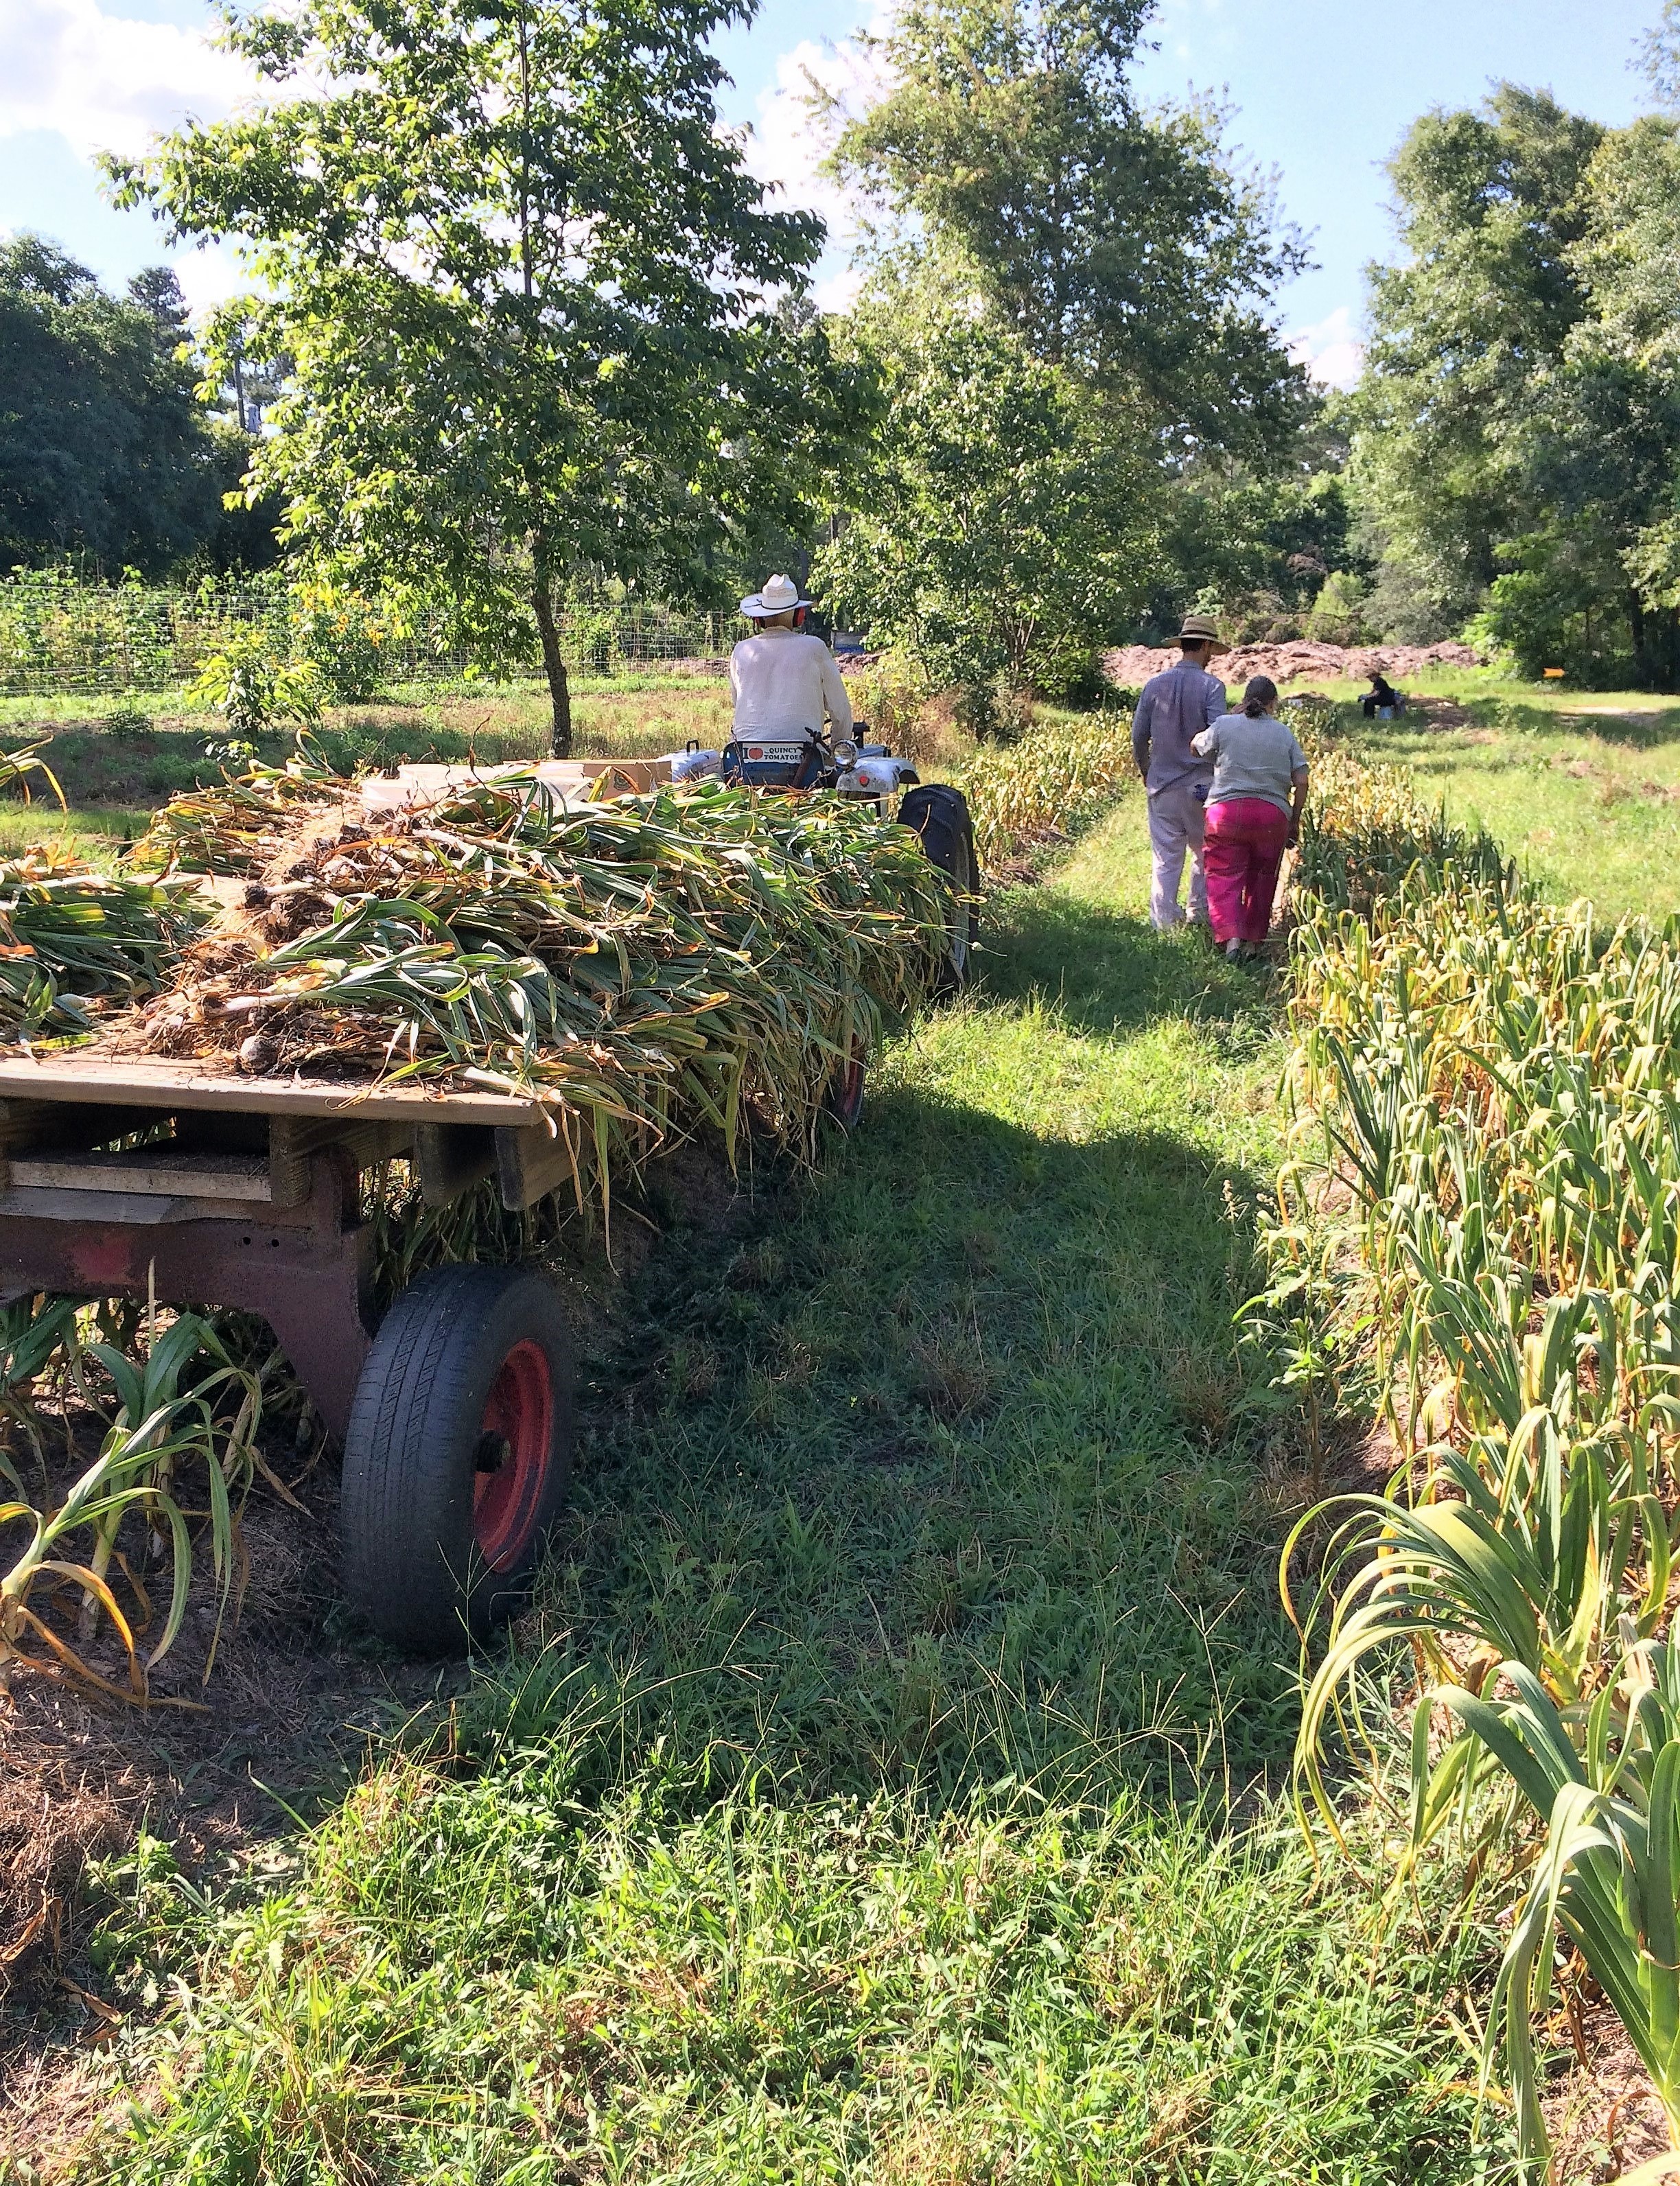 Elephant garlic grows well in our climate, including here at Turkey Hill Farm, where it is being harvested in late spring. Photo by Molly Jameson.